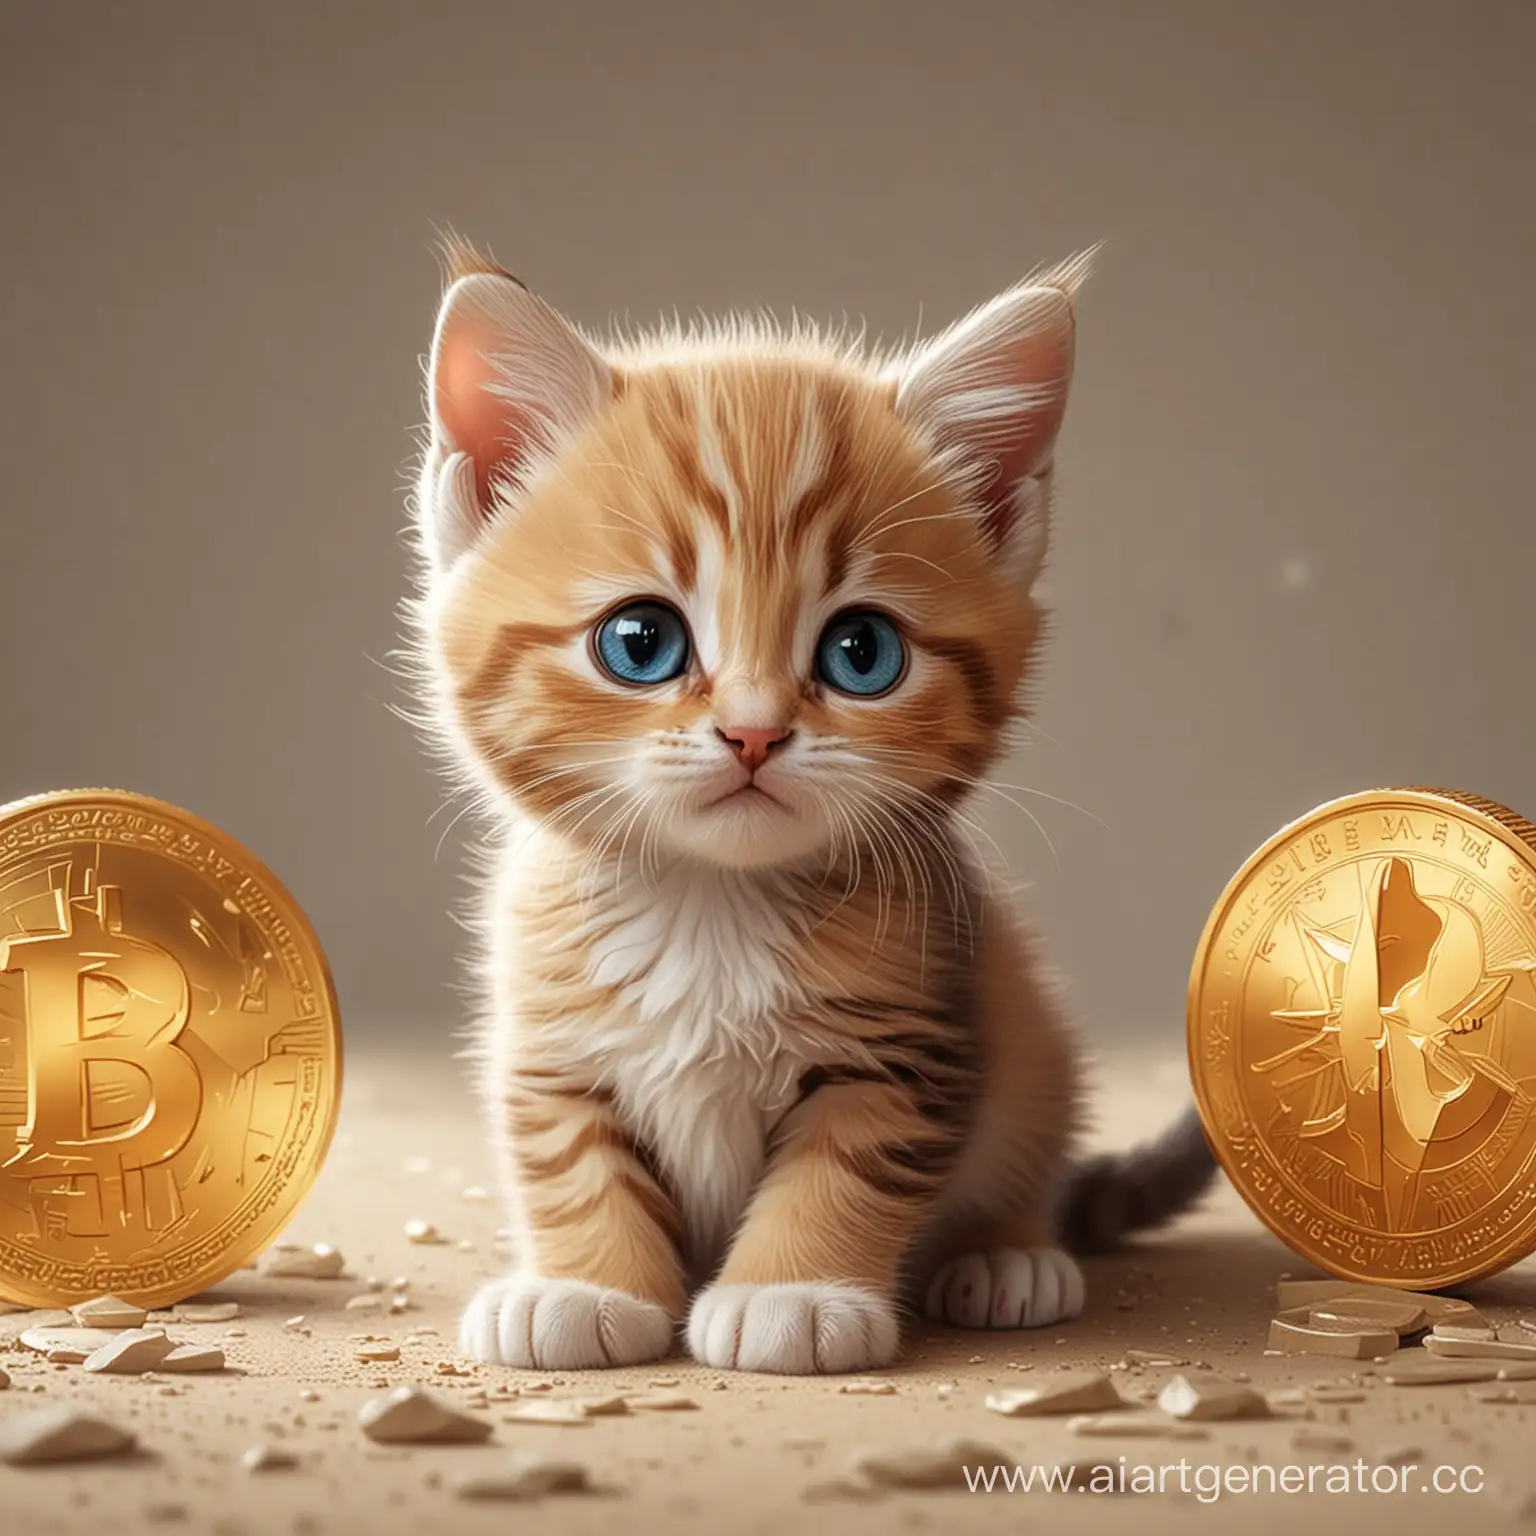 Disney-Style-Kitten-Illustration-with-Cryptocurrency-Theme